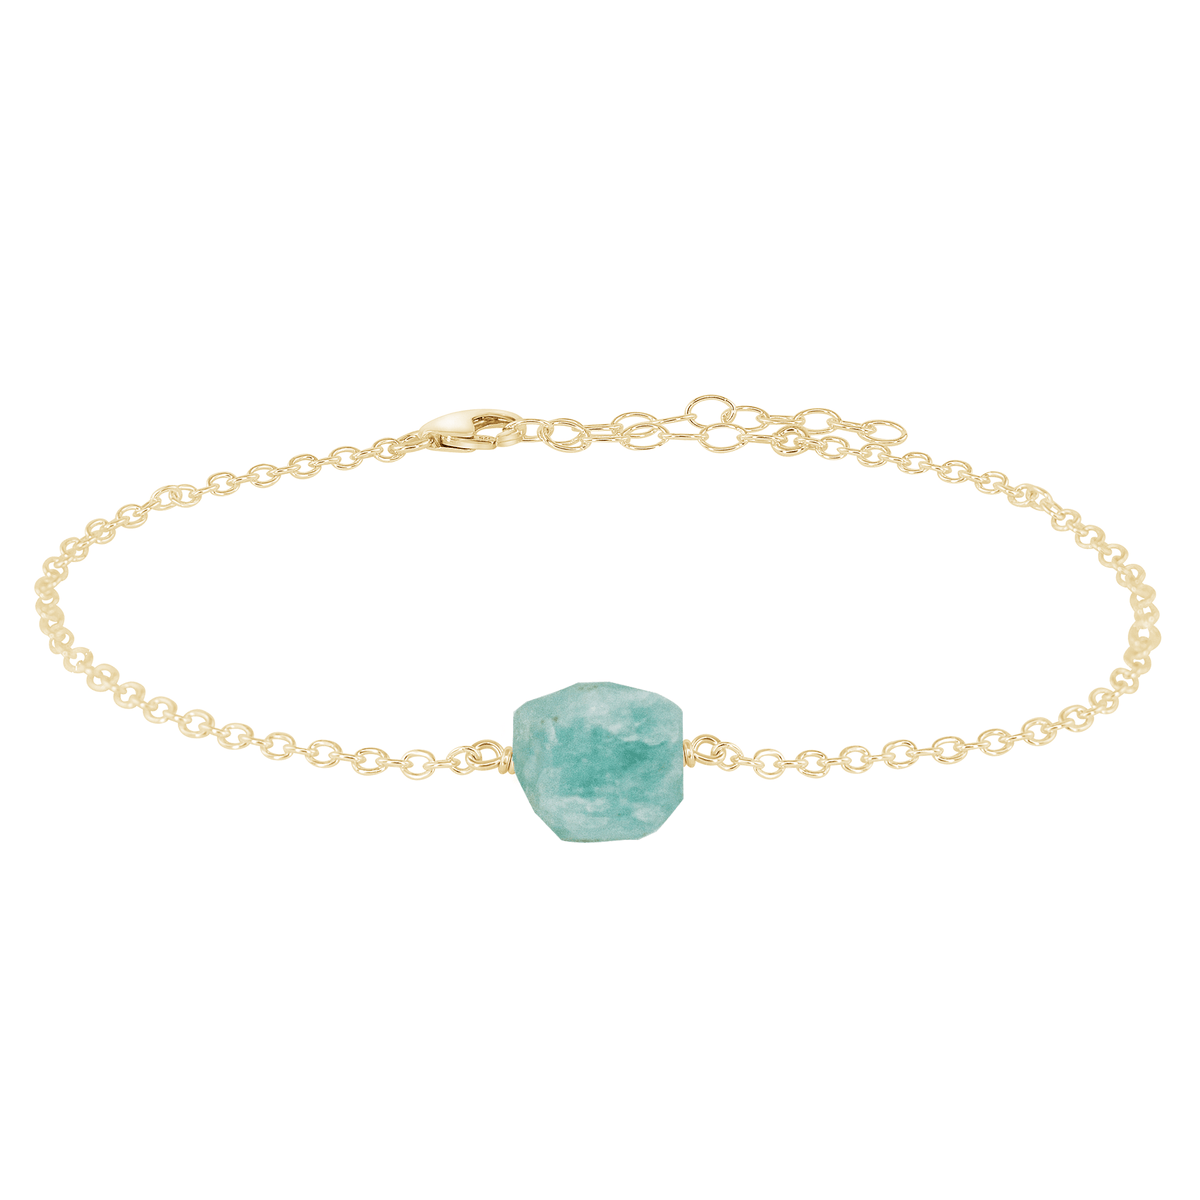 Raw Amazonite Crystal Nugget Anklet - Raw Amazonite Crystal Nugget Anklet - 14k Gold Fill - Luna Tide Handmade Crystal Jewellery